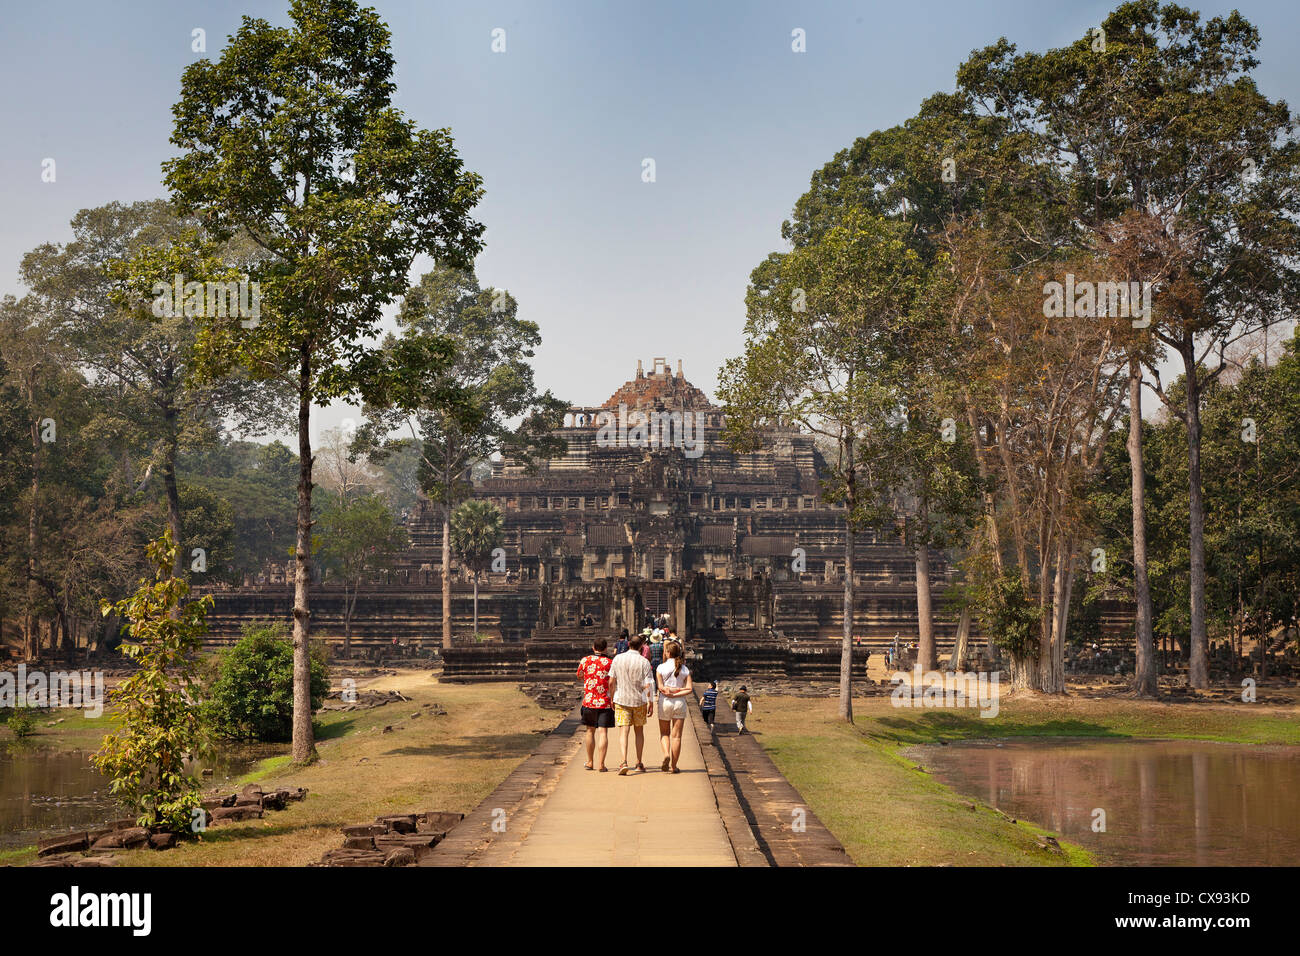 Angkor temple details, carvings, blocks, tourists visiting Stock Photo